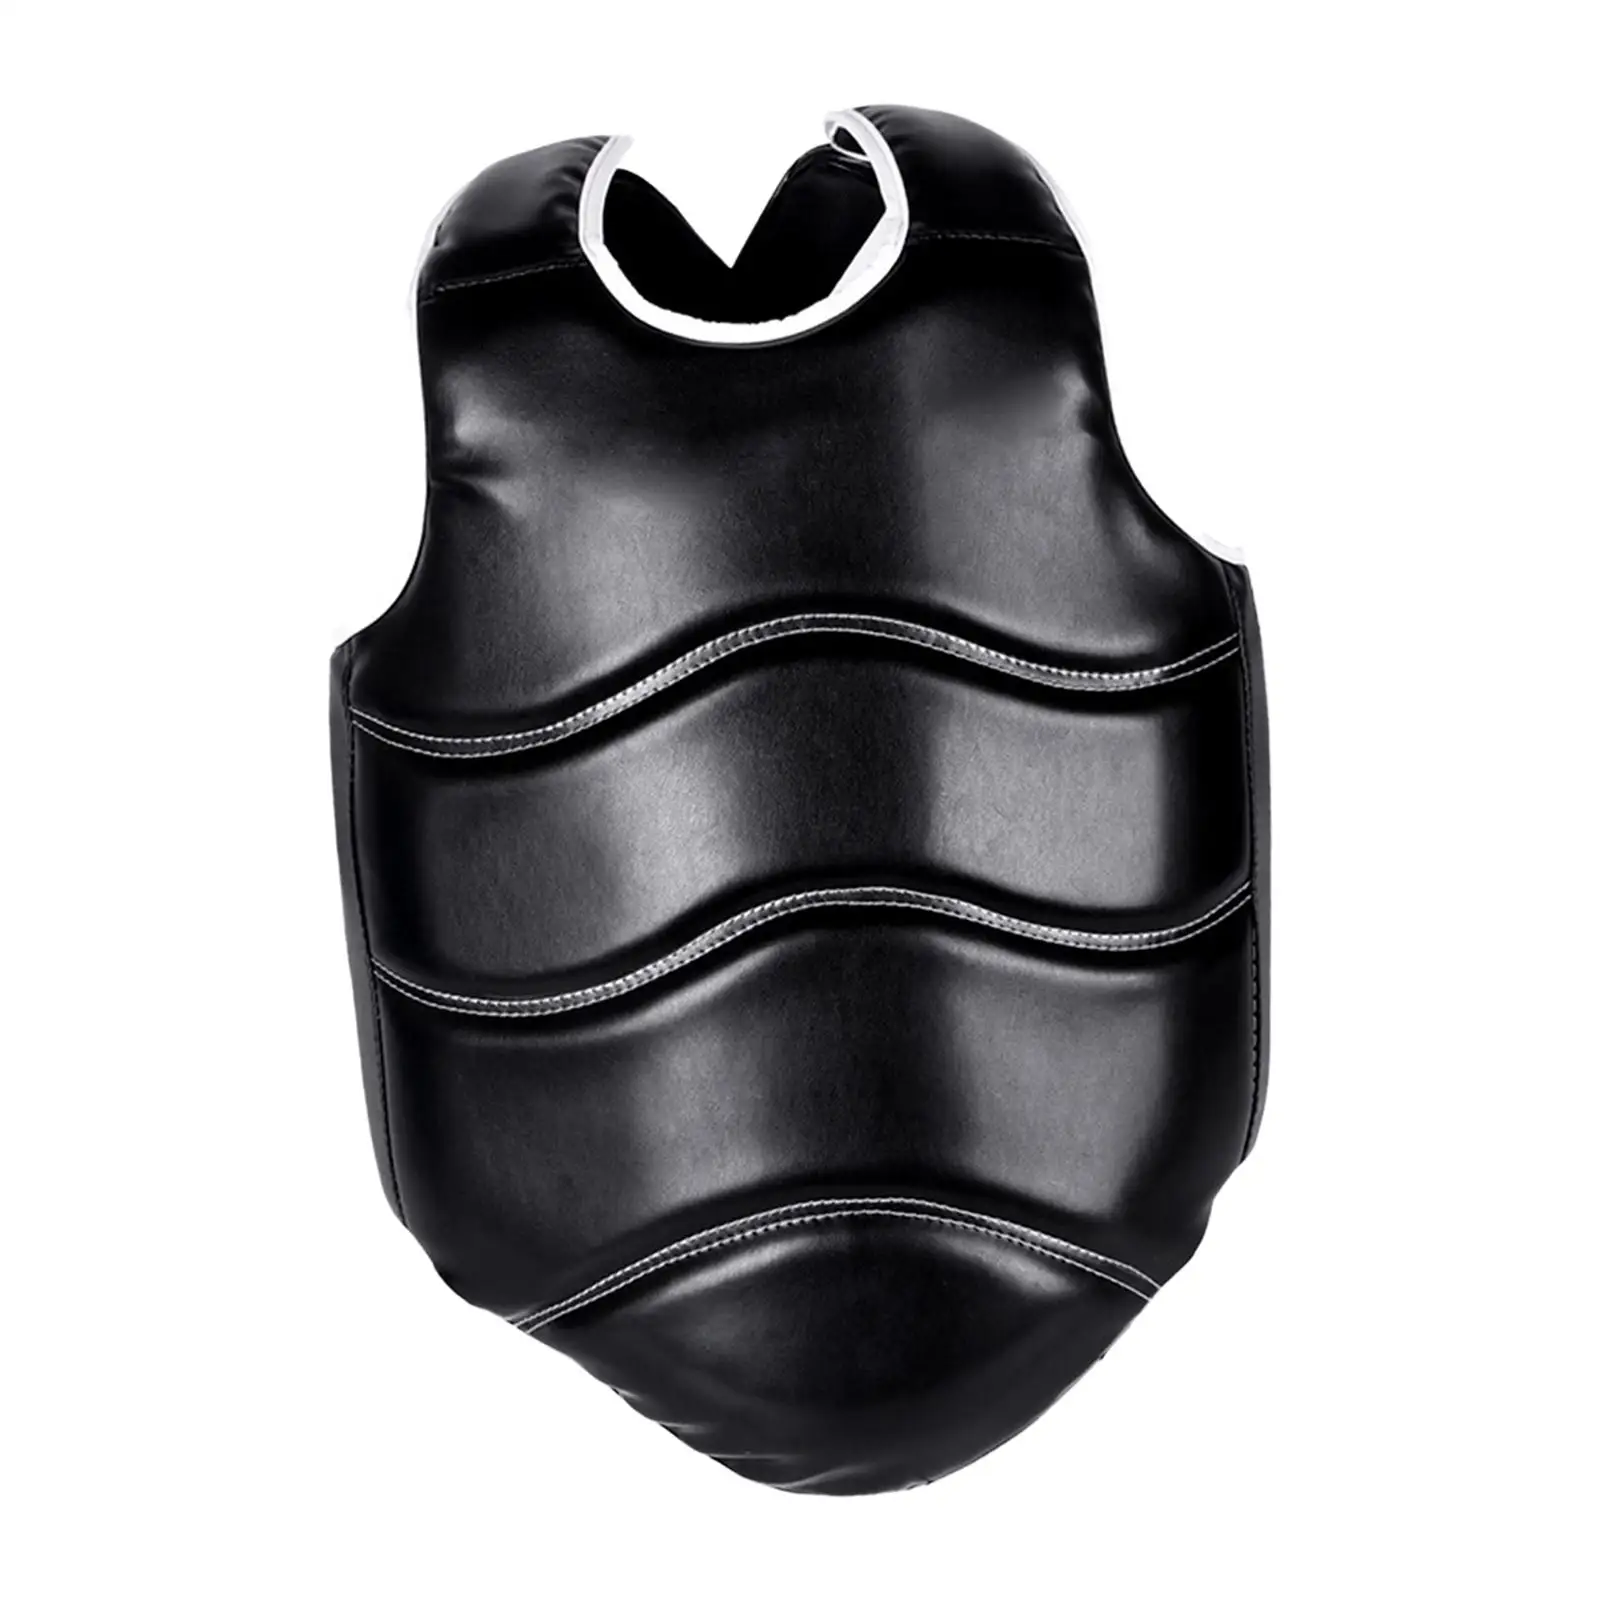 Karate Chest Protector Body Armor Vest Boxing Chest Guard Chest Gear Belly Ribs Protection Mma Taekwondo Unisex Kids Teen